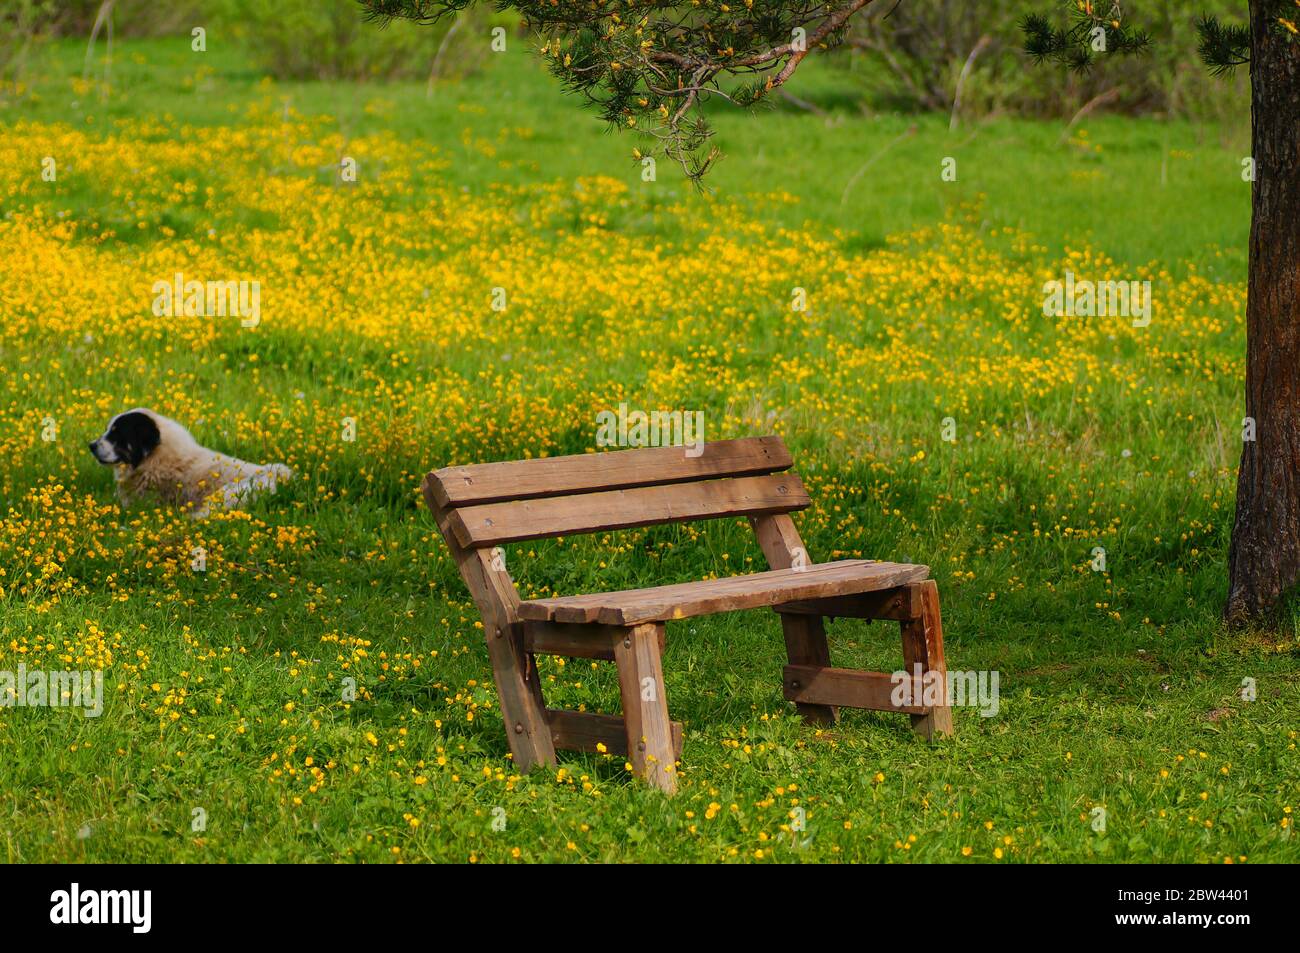 An old bench in the countryside. old wooden bench in the meadow. background a dog lying on the grass. Stock Photo